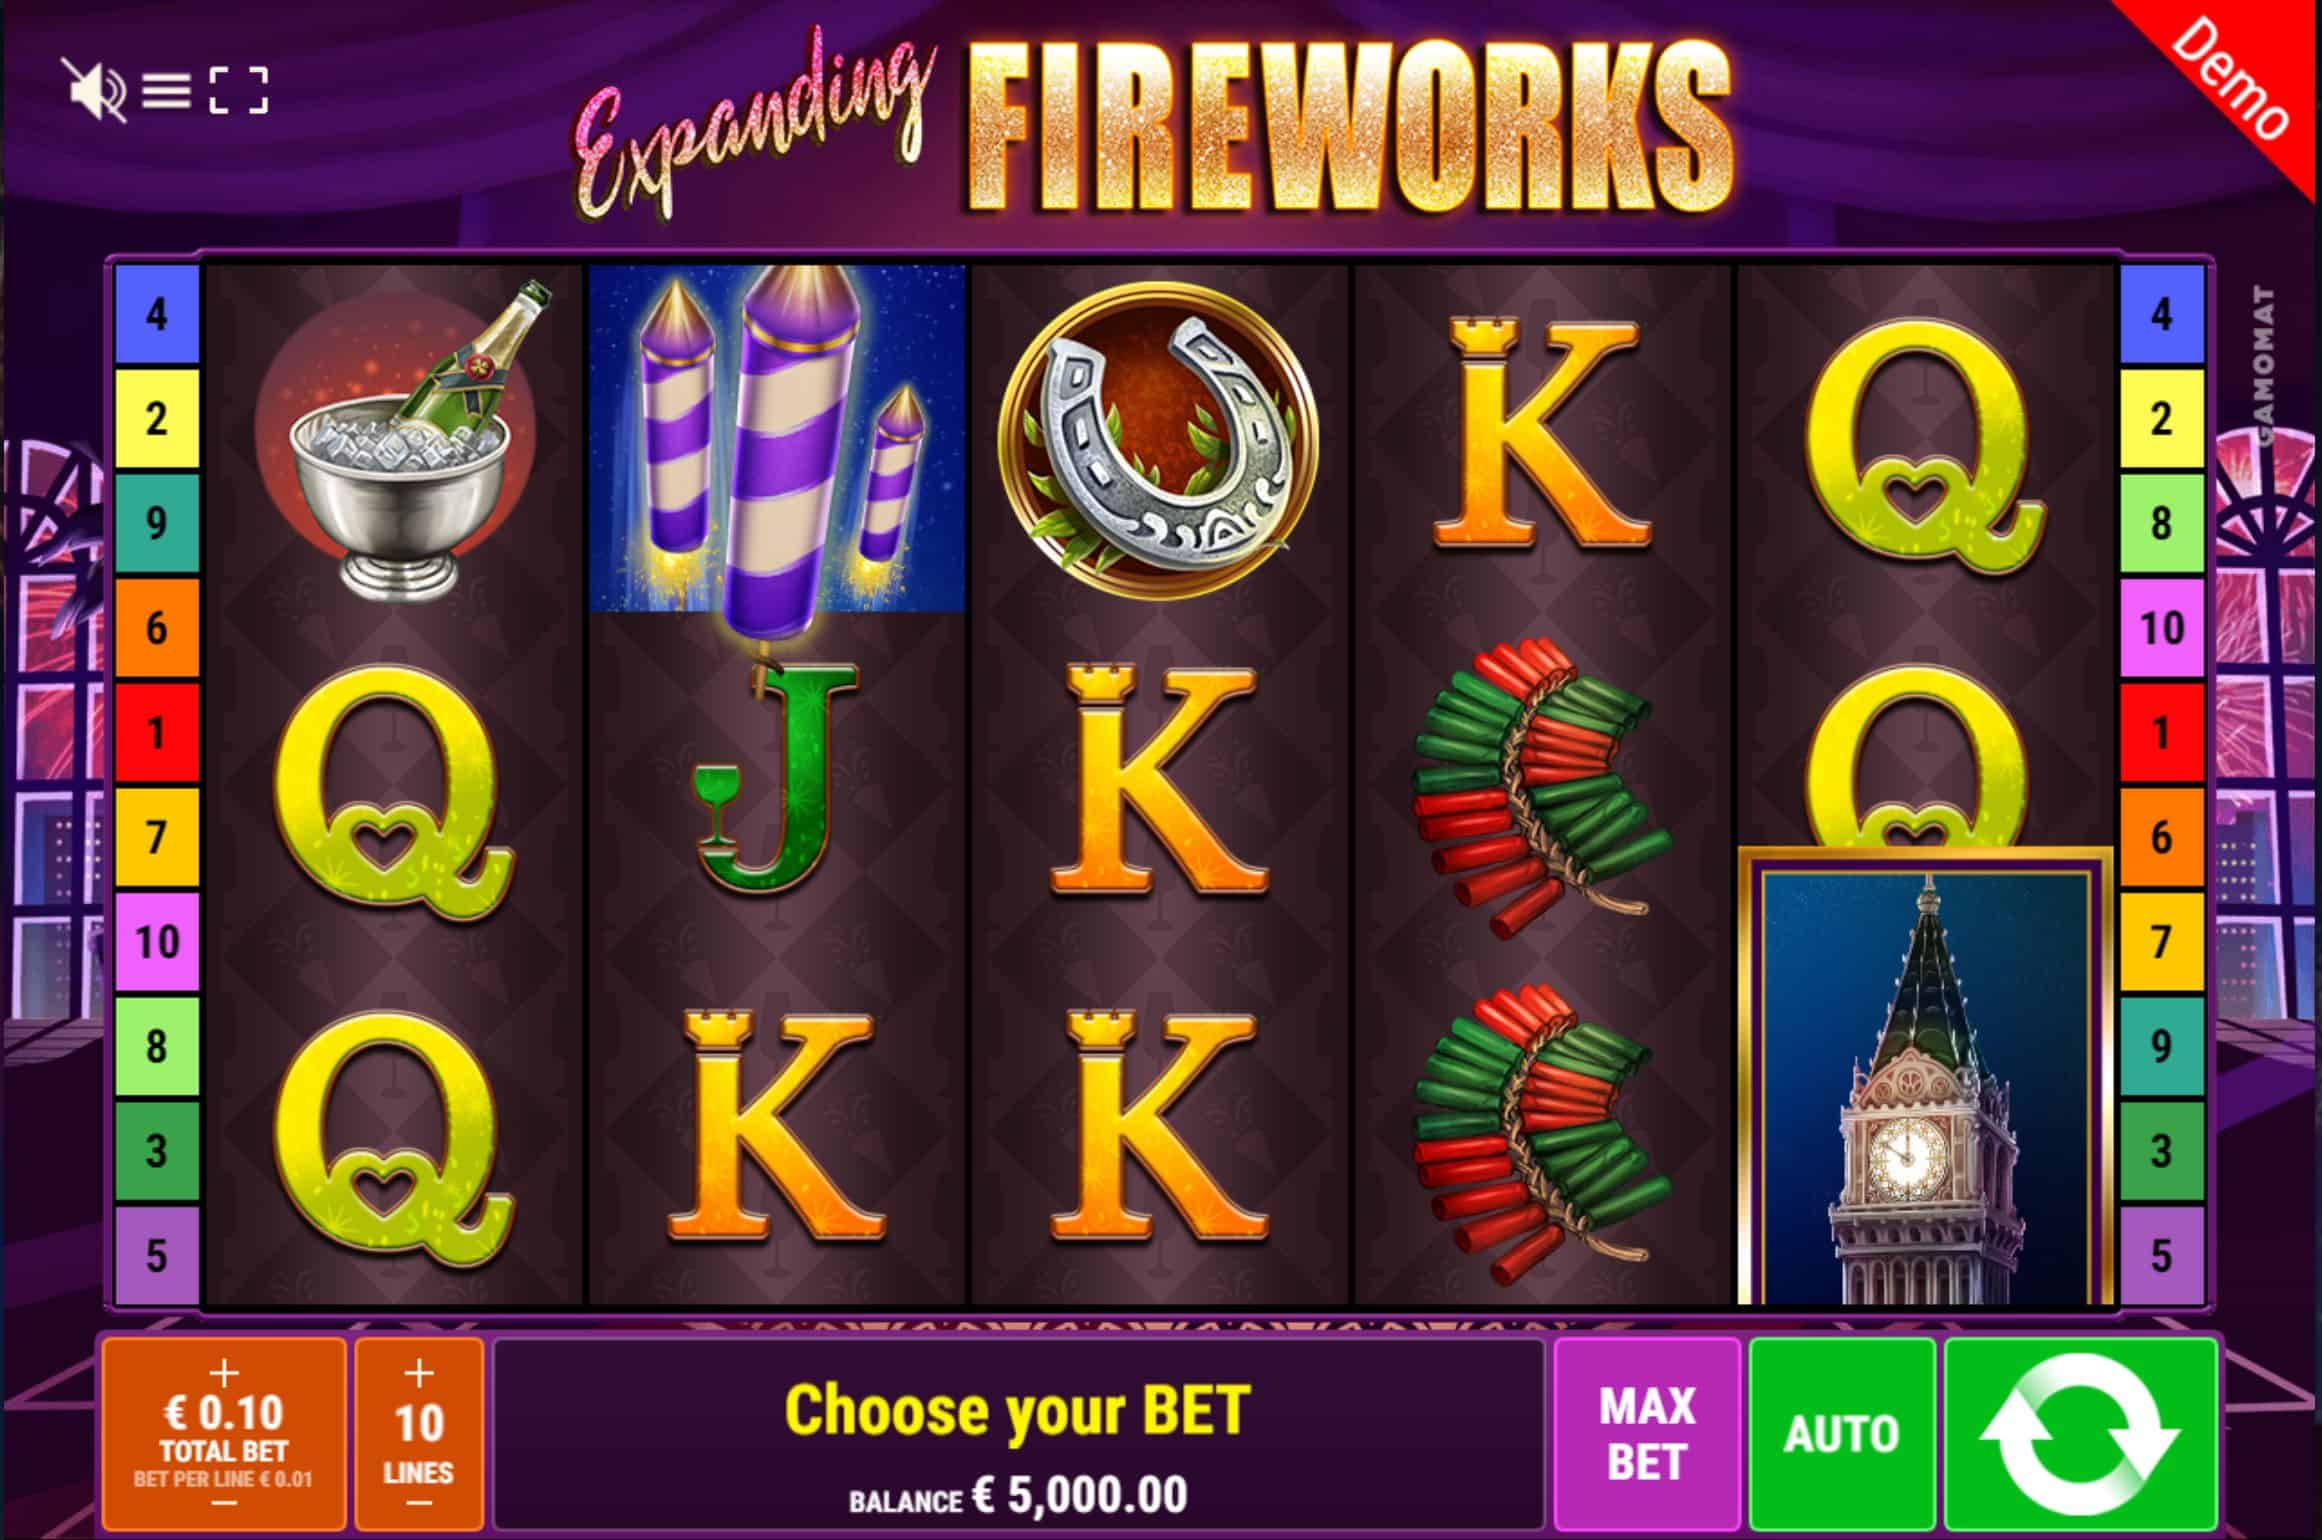 Expanding Fireworks Slot Game Free Play at Casino Ireland 01